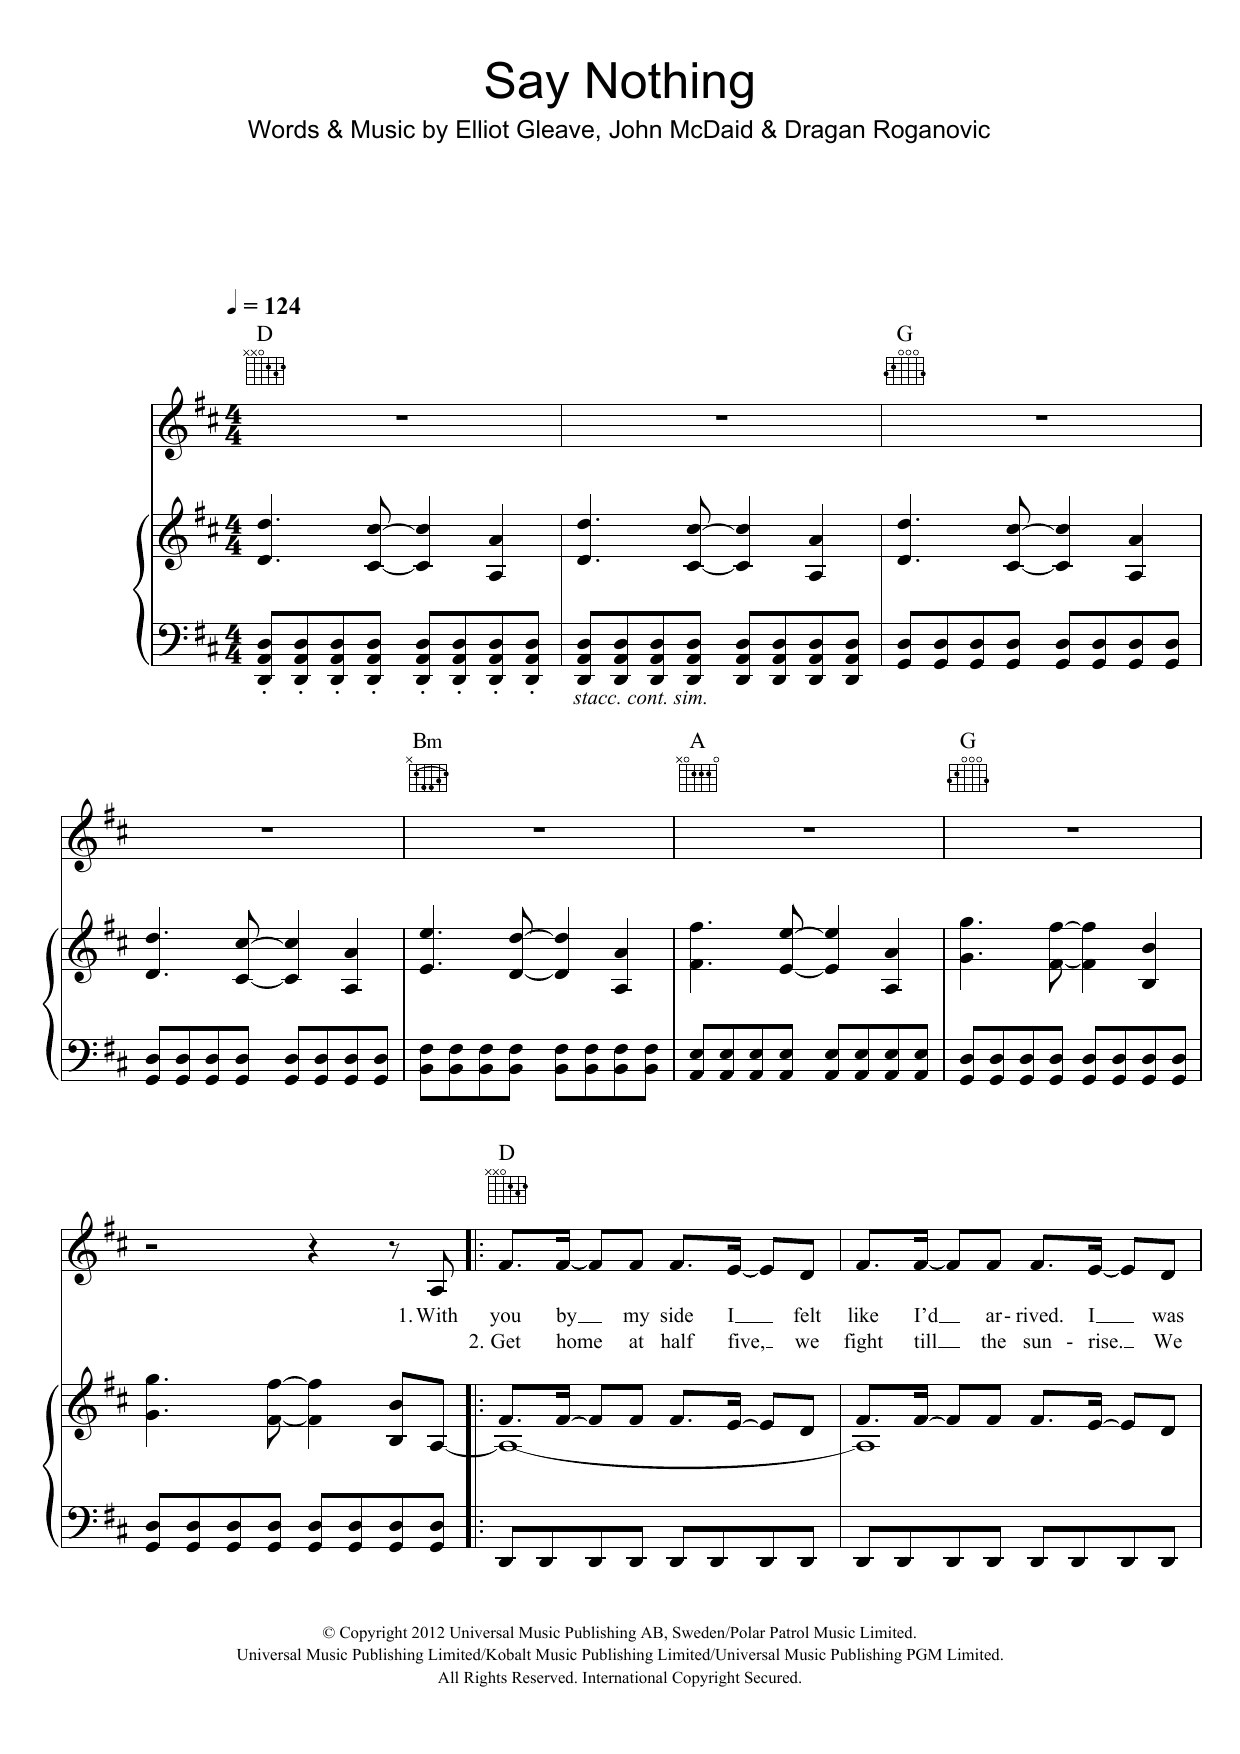 Download Example Say Nothing Sheet Music